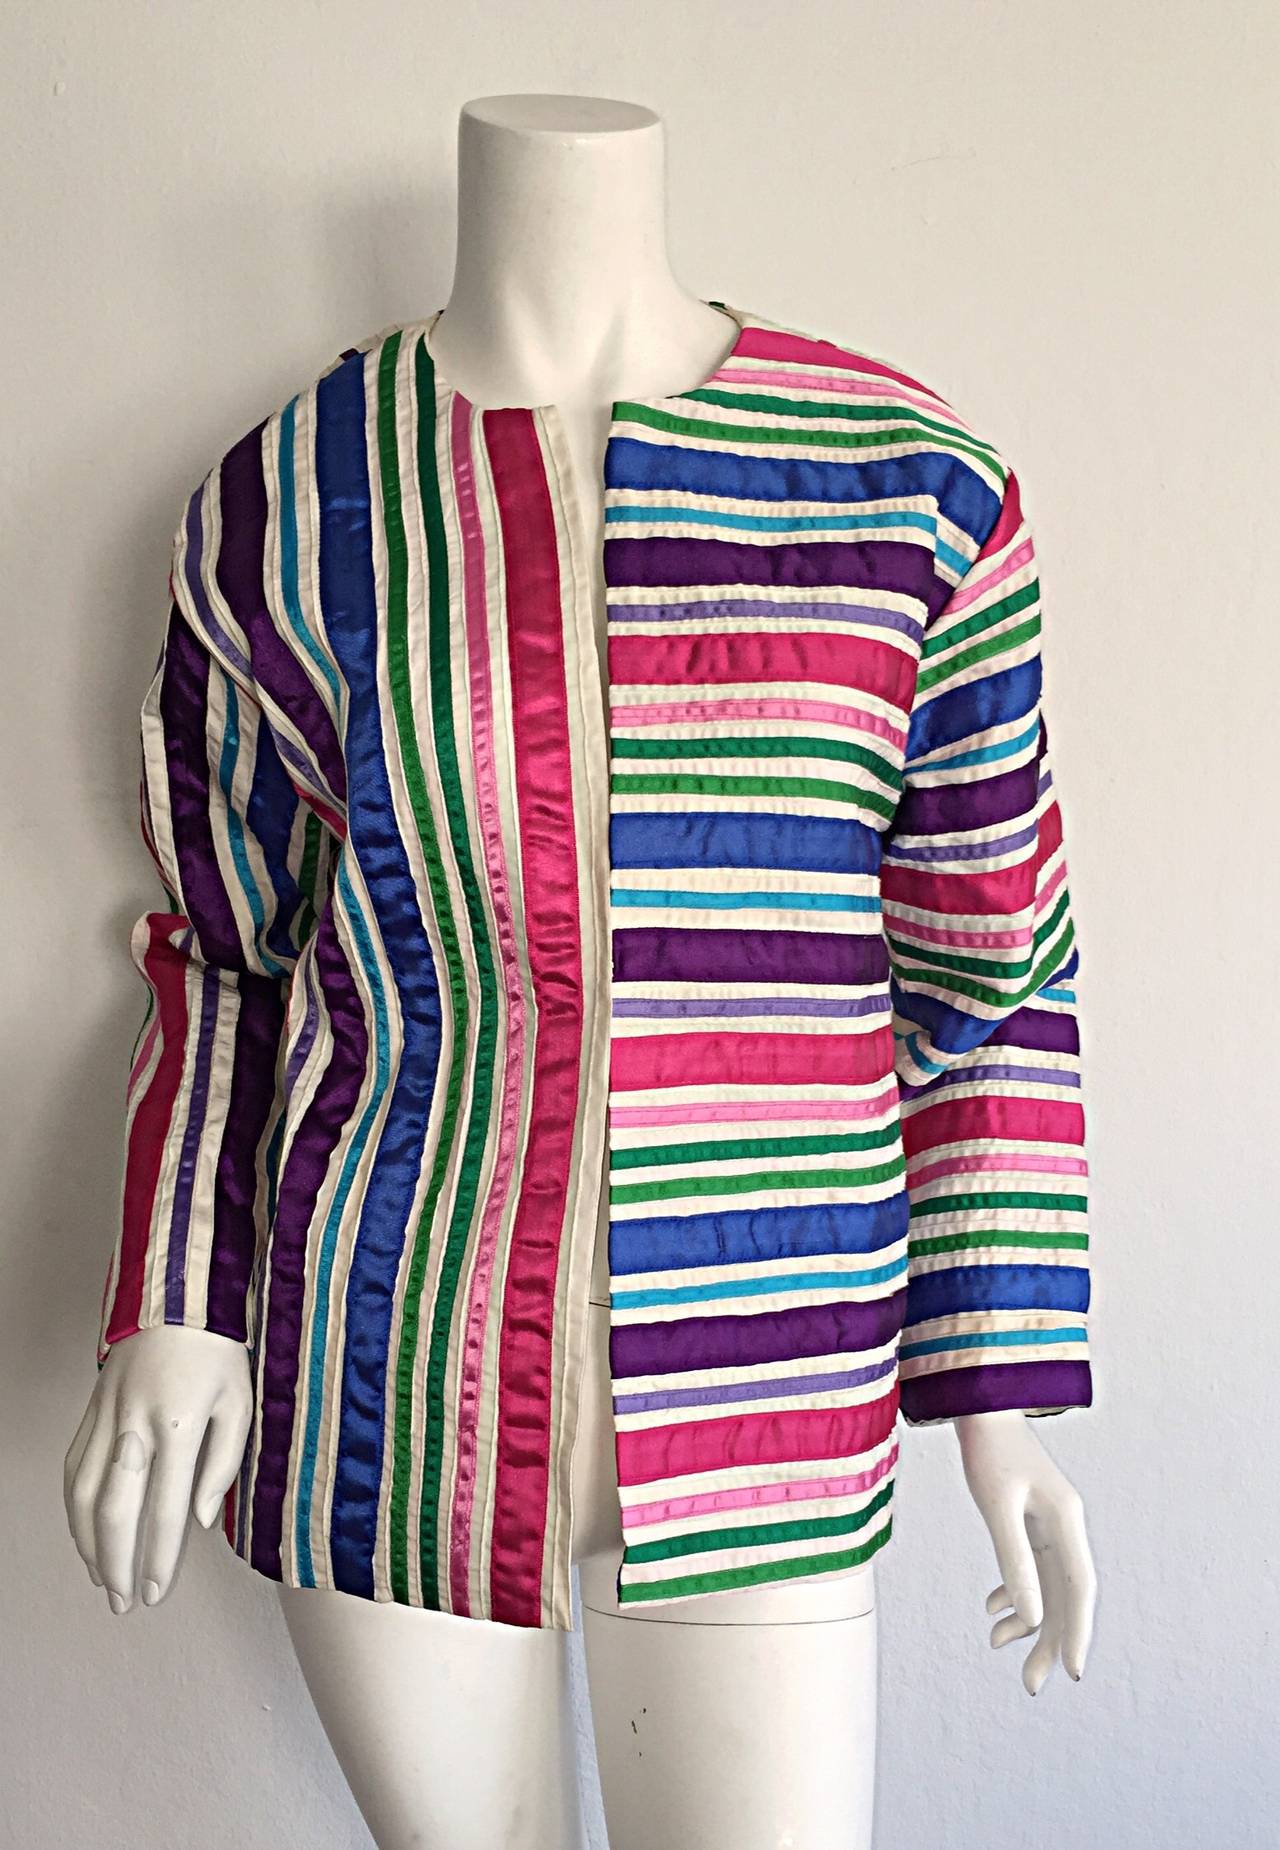 Amazing vintage Tachi Castillo cotton jacket! Features panels of colorful ribbons throughout. Hook-and-eye closure down front. Looks amazing on! Extremely versatile. In great condition. Approximately Size Small-Medium

Measurements:
38-40 inch